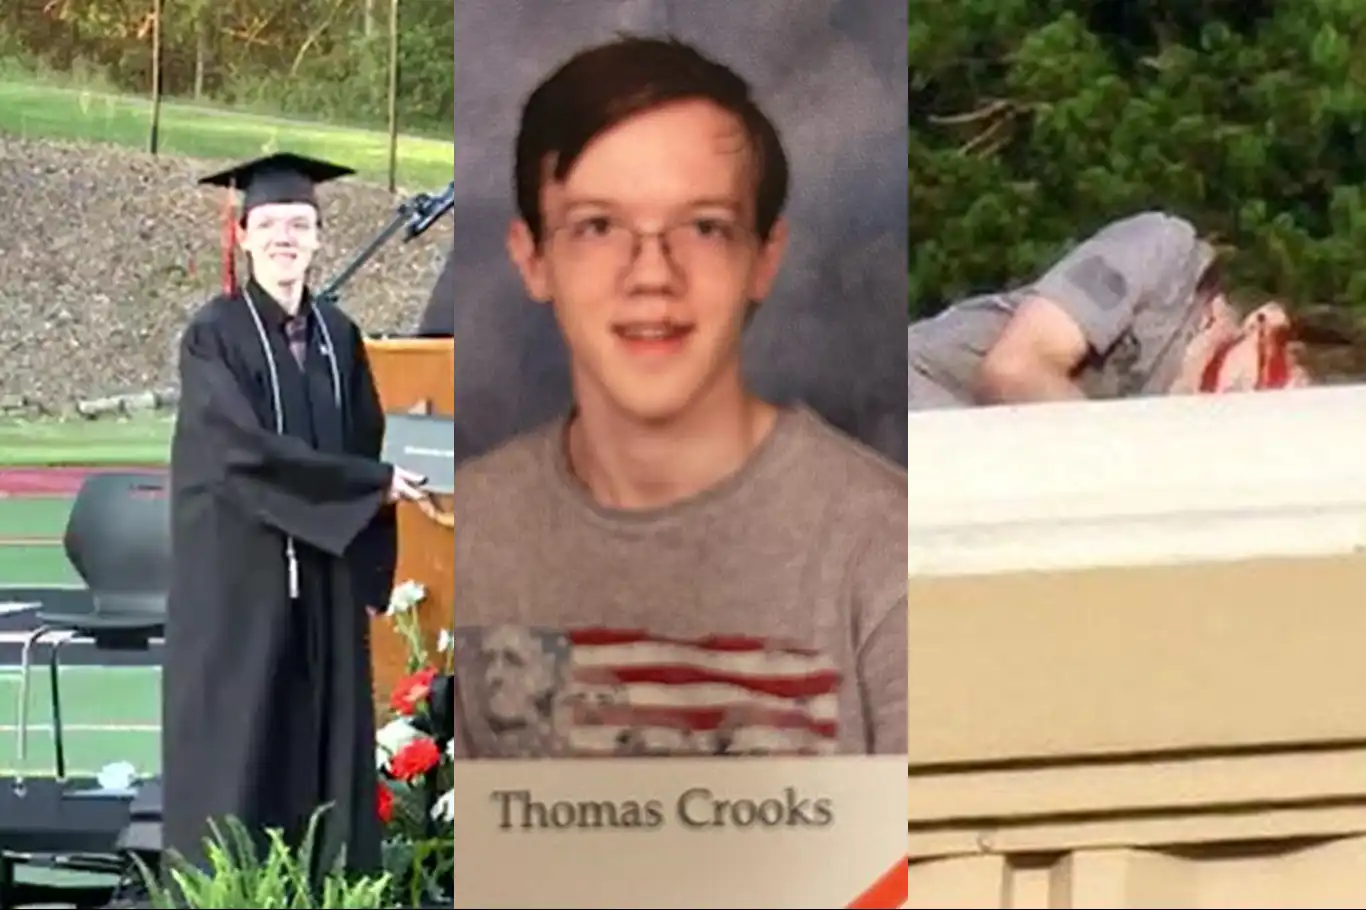 New details surface on Thomas Crooks, attempted assassin of Trump